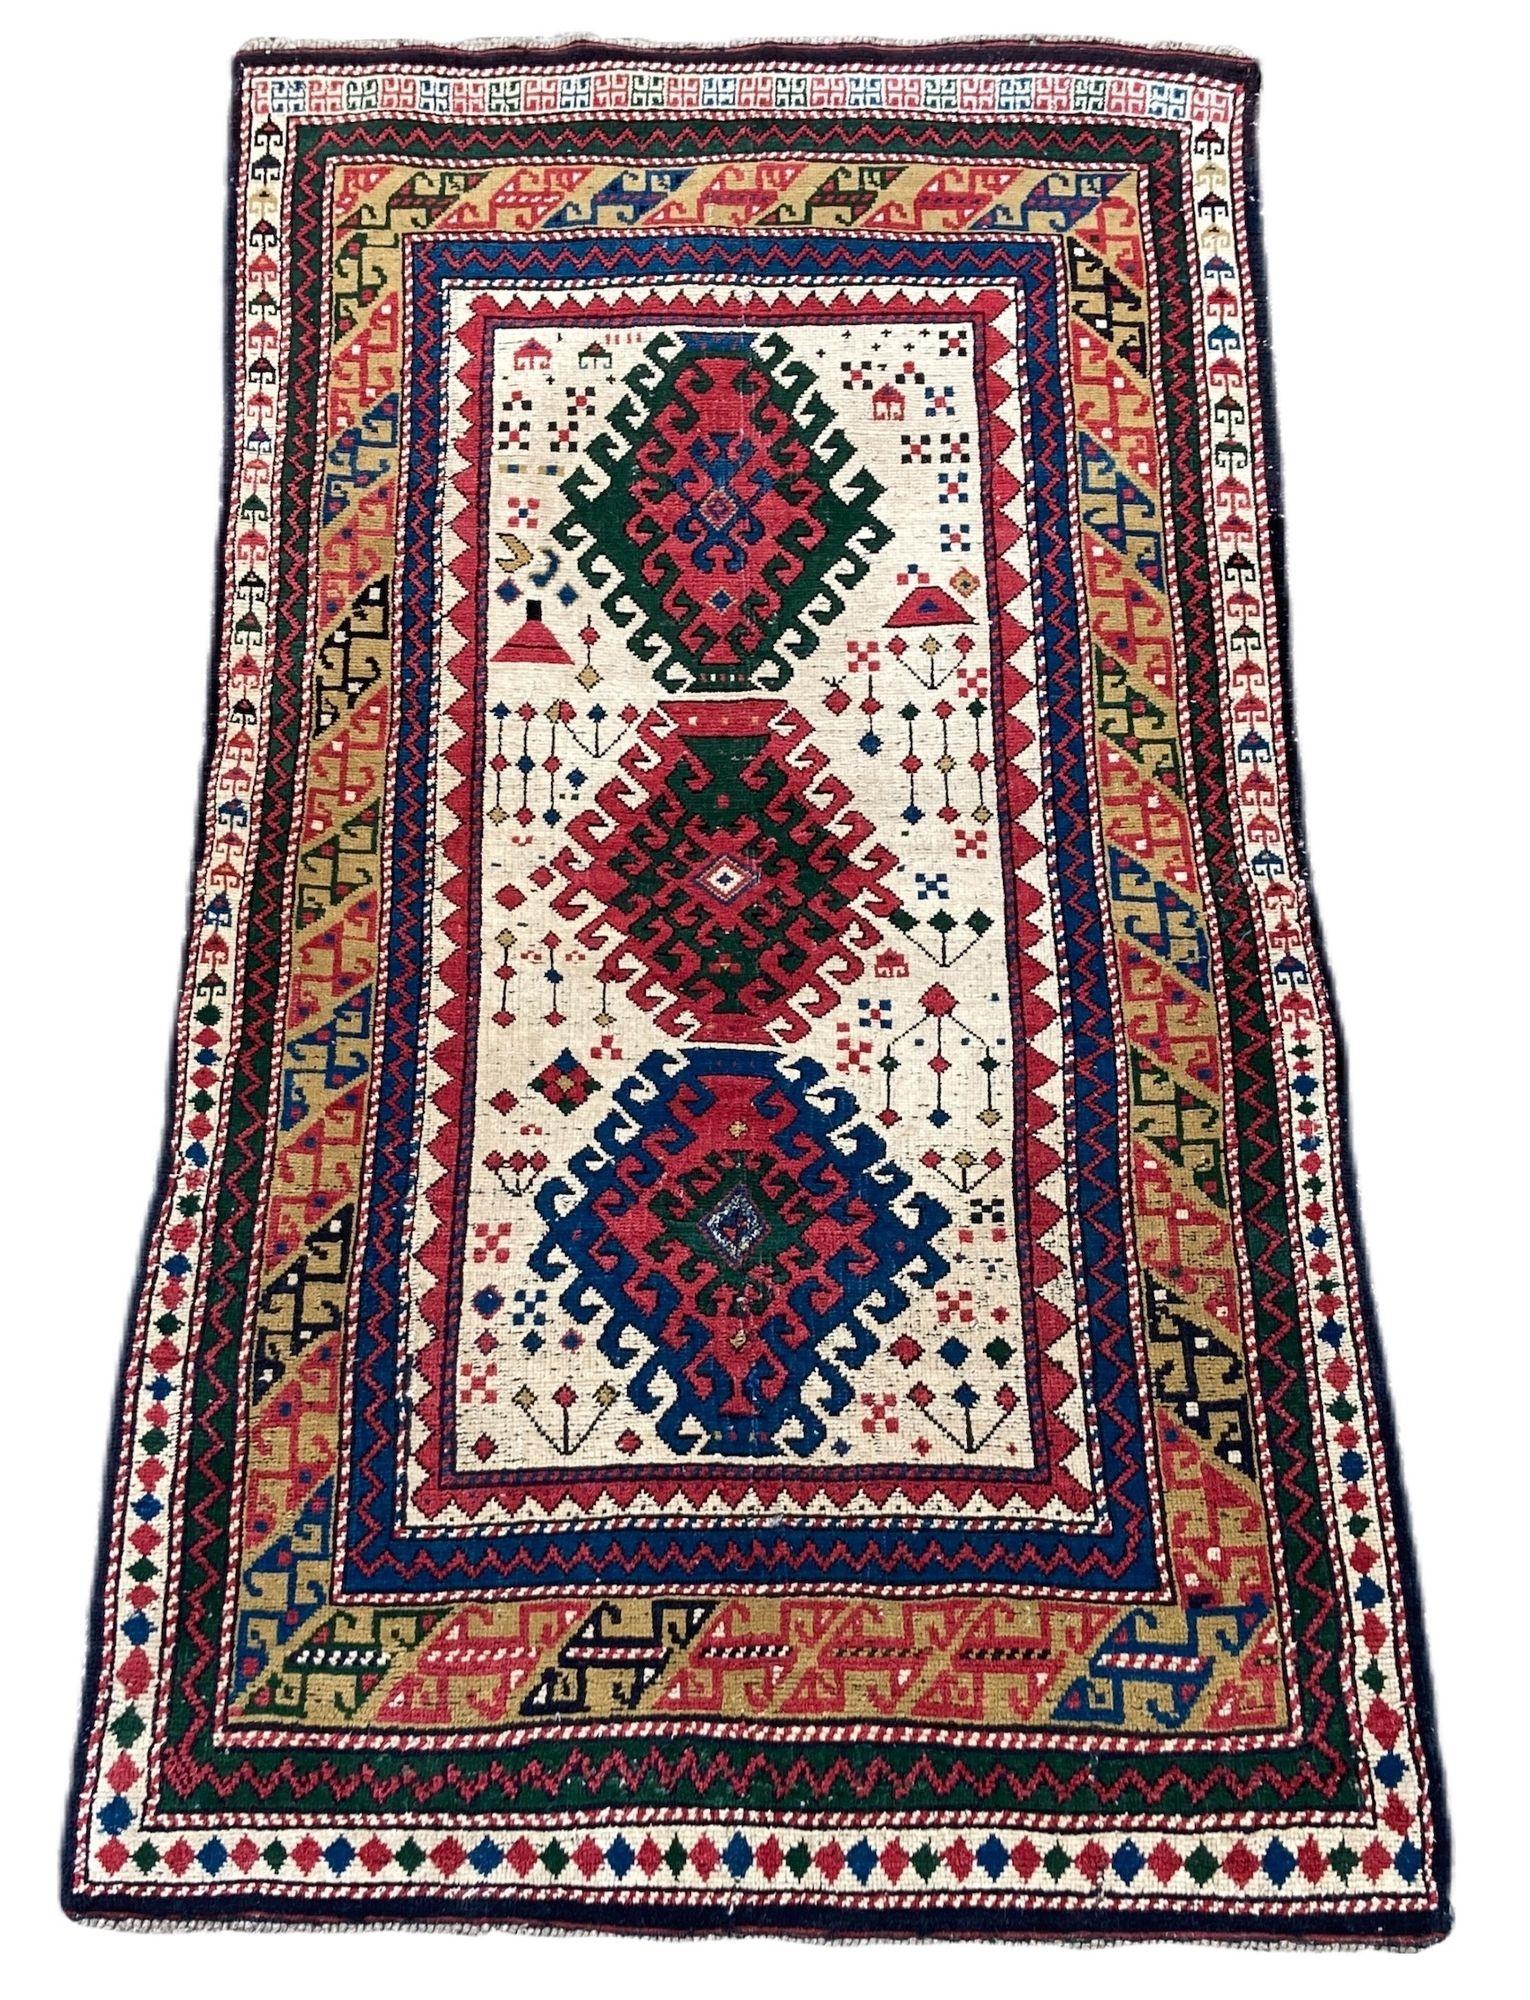 A beautiful little antique Kazak rug, handwoven in the Caucasus mountains of modern day Azerbaijan circa 1920. It features a 3 medallion geometrical design on an ivory field of stylised flowers. Fabulous colours and a great little rug.
Size: 1.82m x